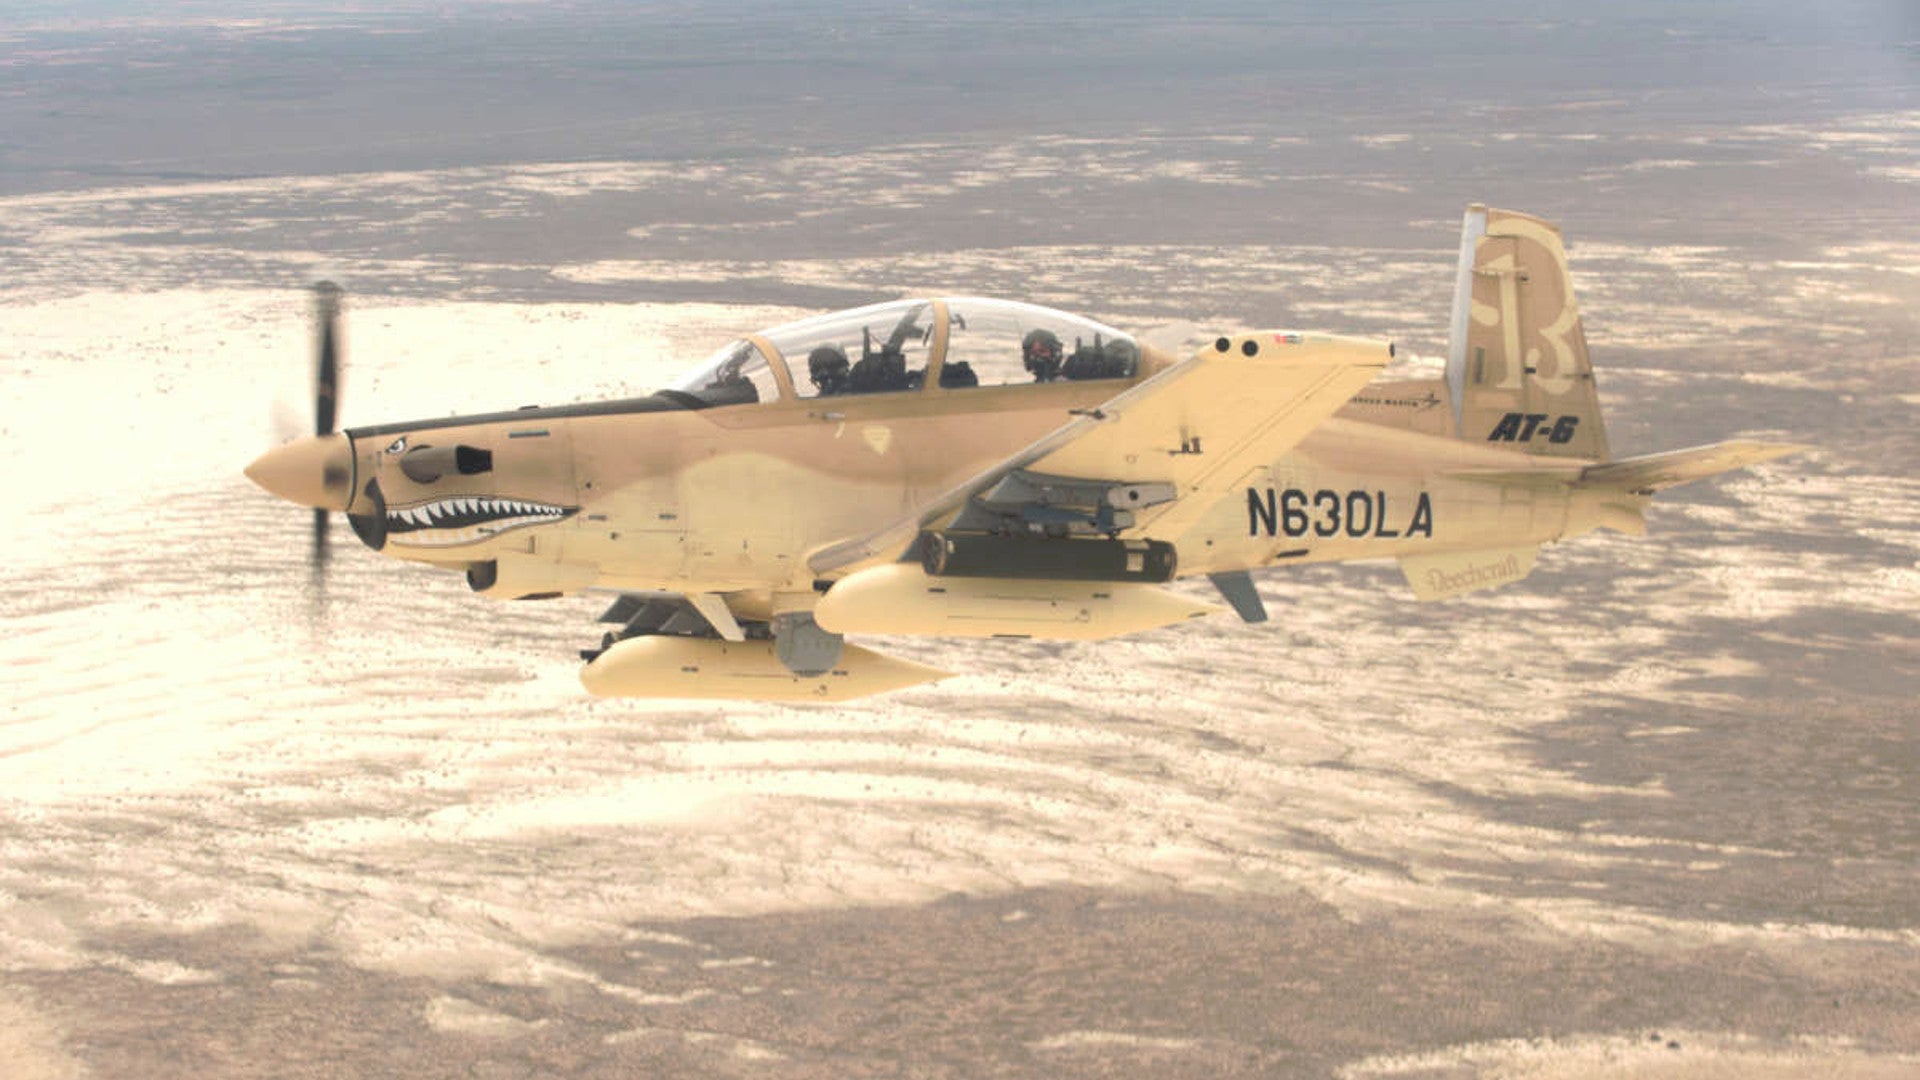 This Is the Tech Special Operators Want for Their Light Attack Planes